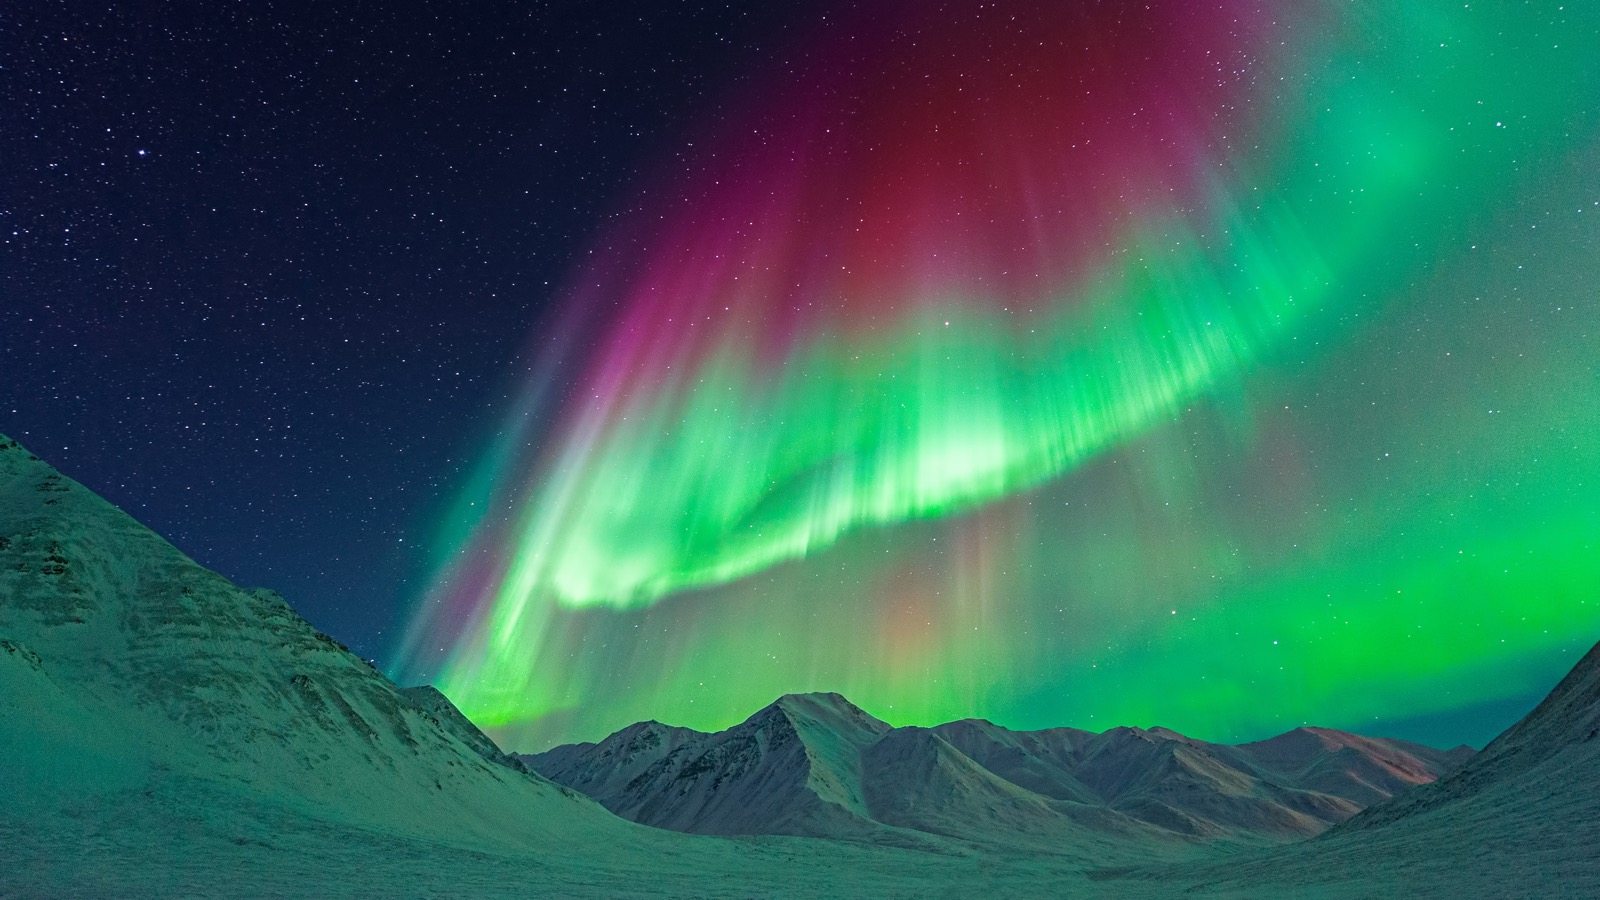 Can You Match These Natural Wonders to Their Locations? Aurora Borealis - Alaska, USA